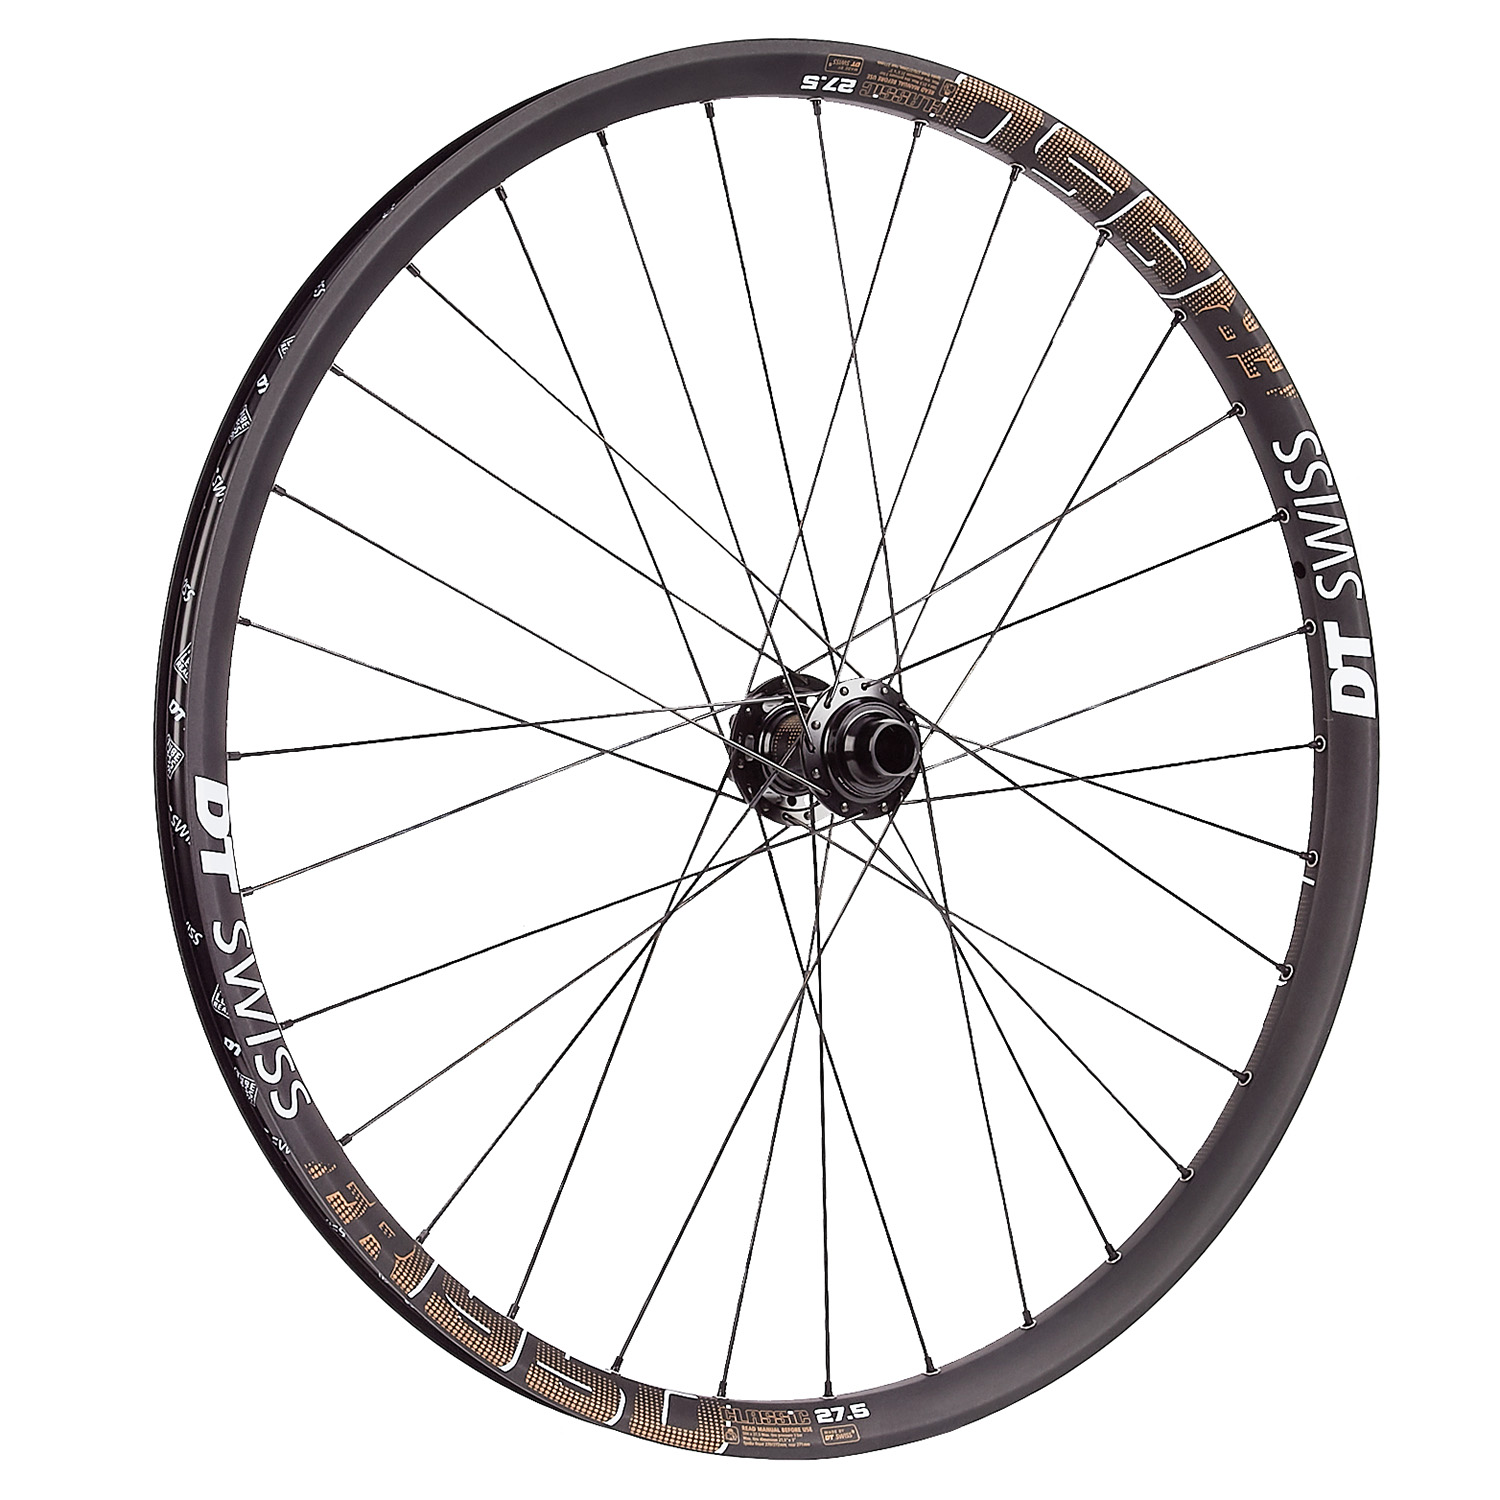 DT Swiss Laufrad FR 1950 Classic Vorn, 27.5 Zoll, 110x20 mm, Tubeless Ready